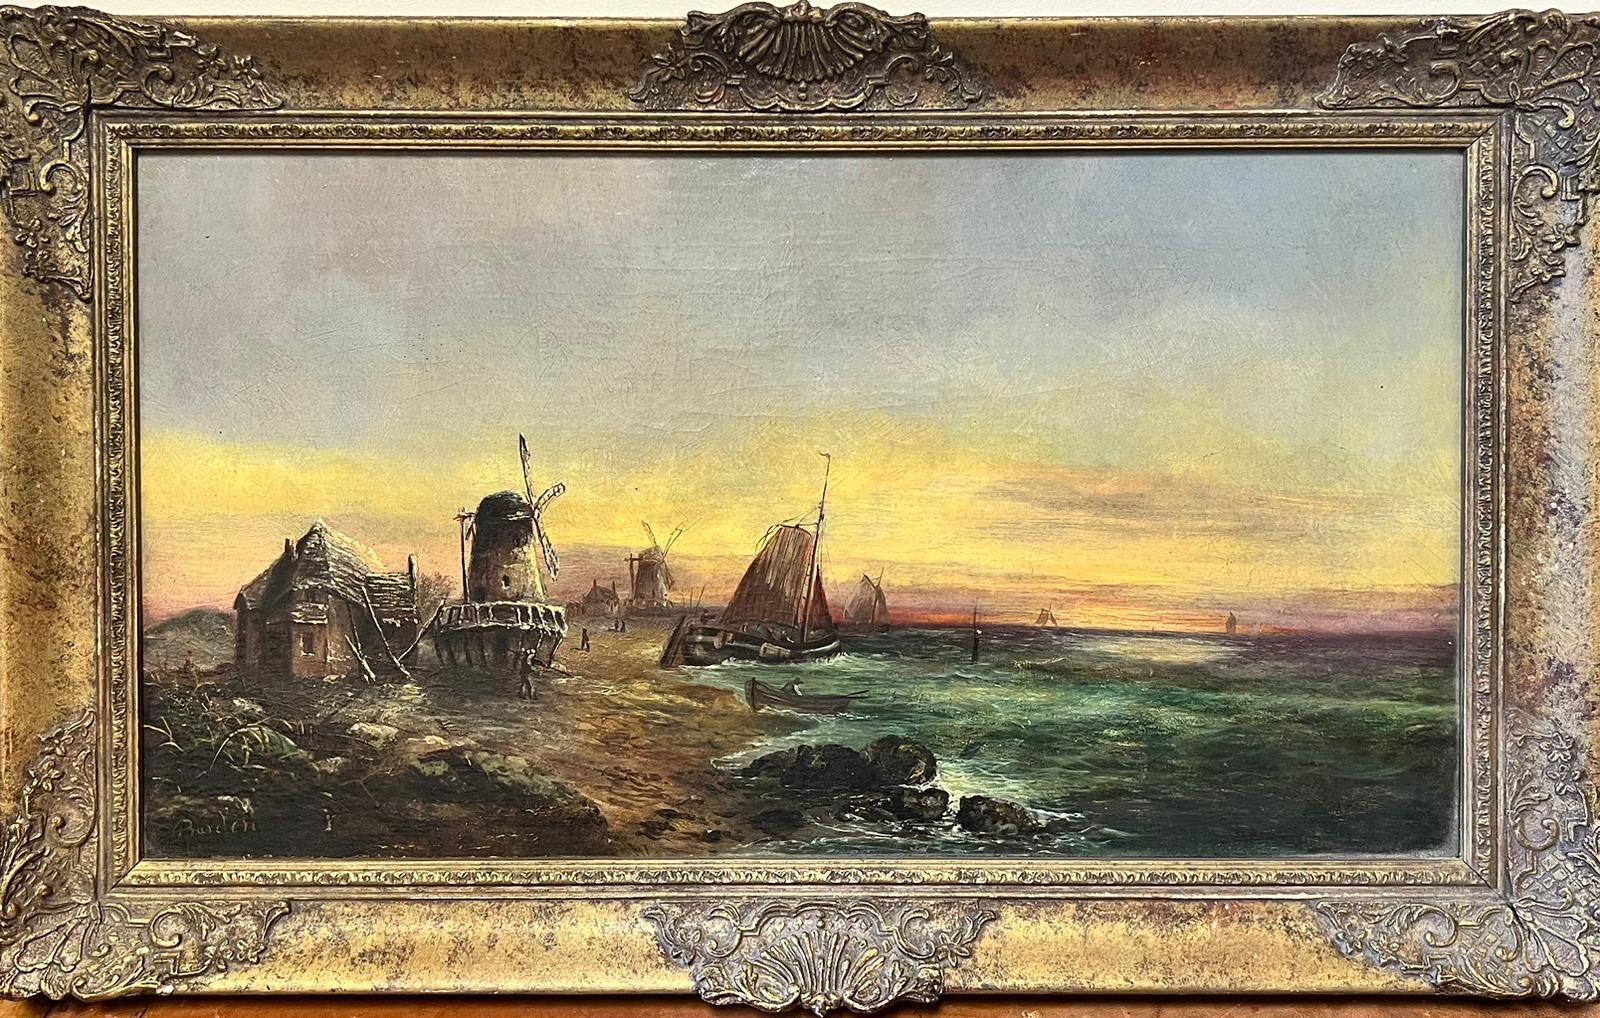 Victorian School Landscape Painting - Signed Antique English Oil Painting Busy Coastal Scene Fishing Boats & Windmills